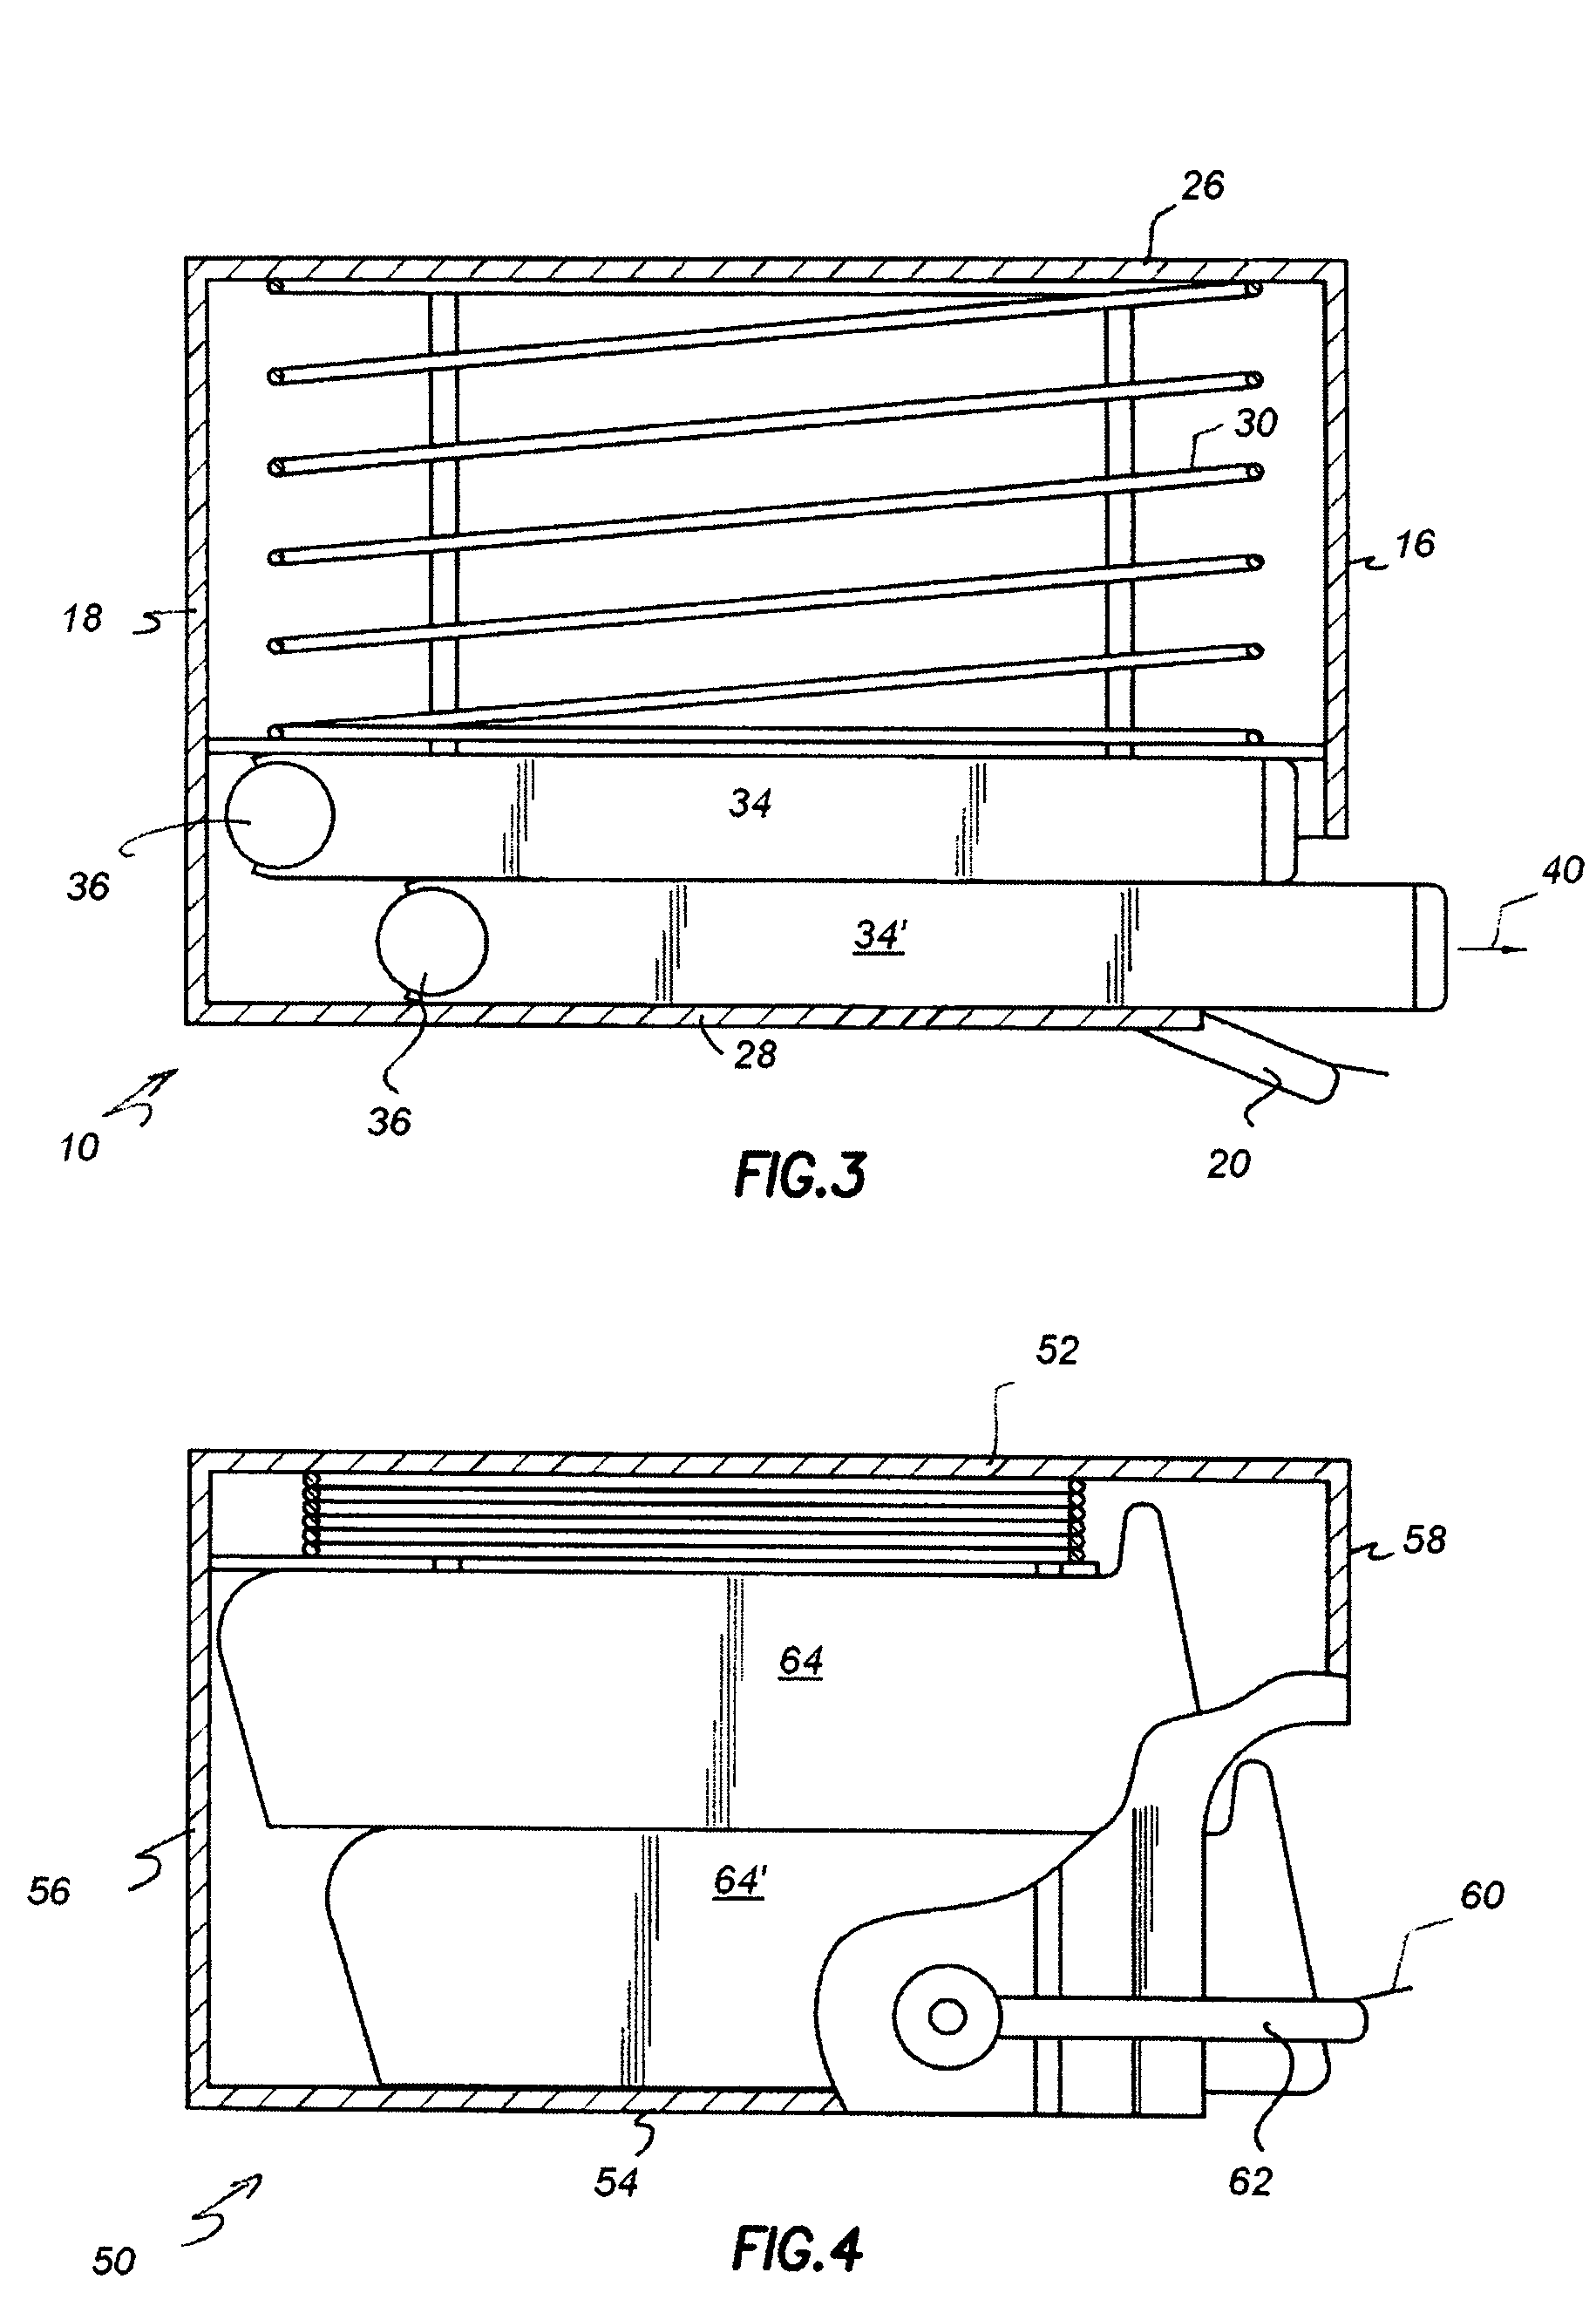 Device and method for retaining and dispensing ammunition clips